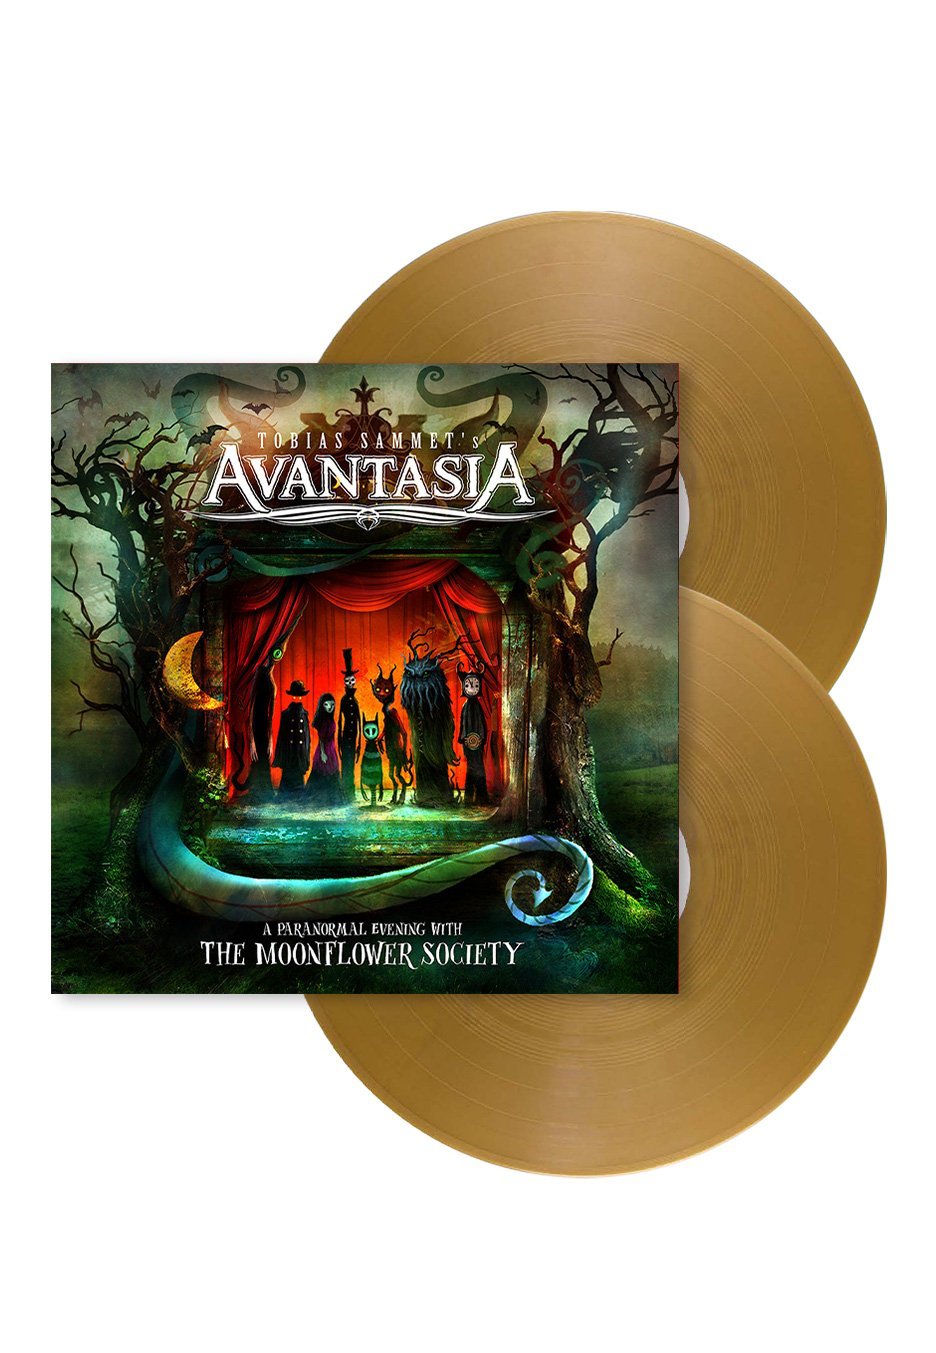 Avantasia - A Paranormal Evening with the Moonflower Society Inca Gold Ltd. - Colored 2 Vinyl